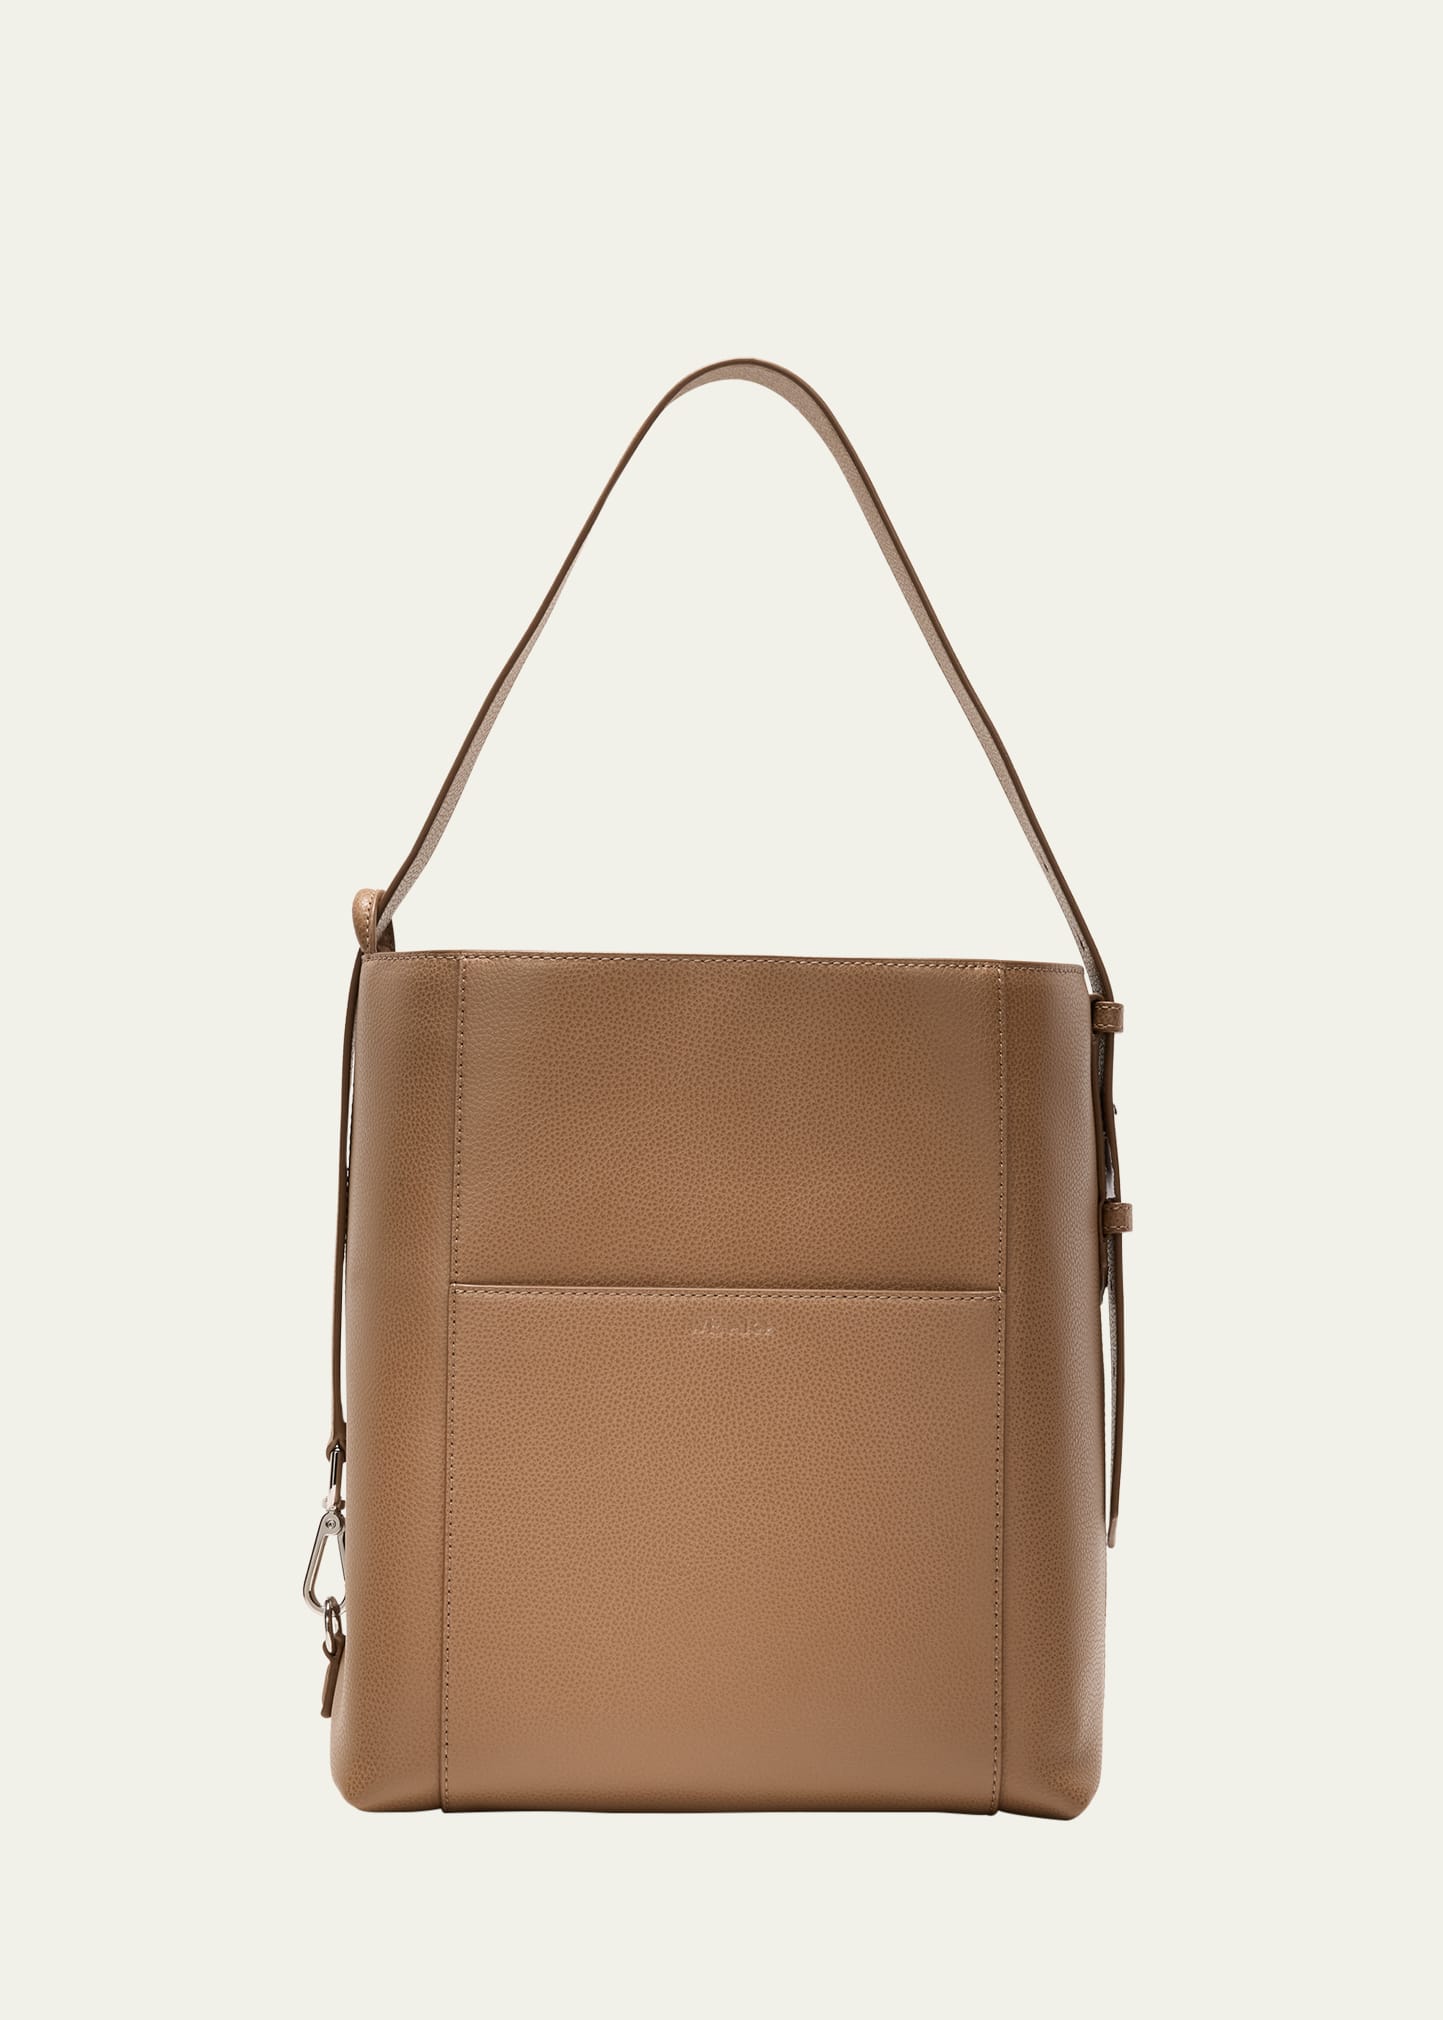 The Cityscape Leather Hobo Bag